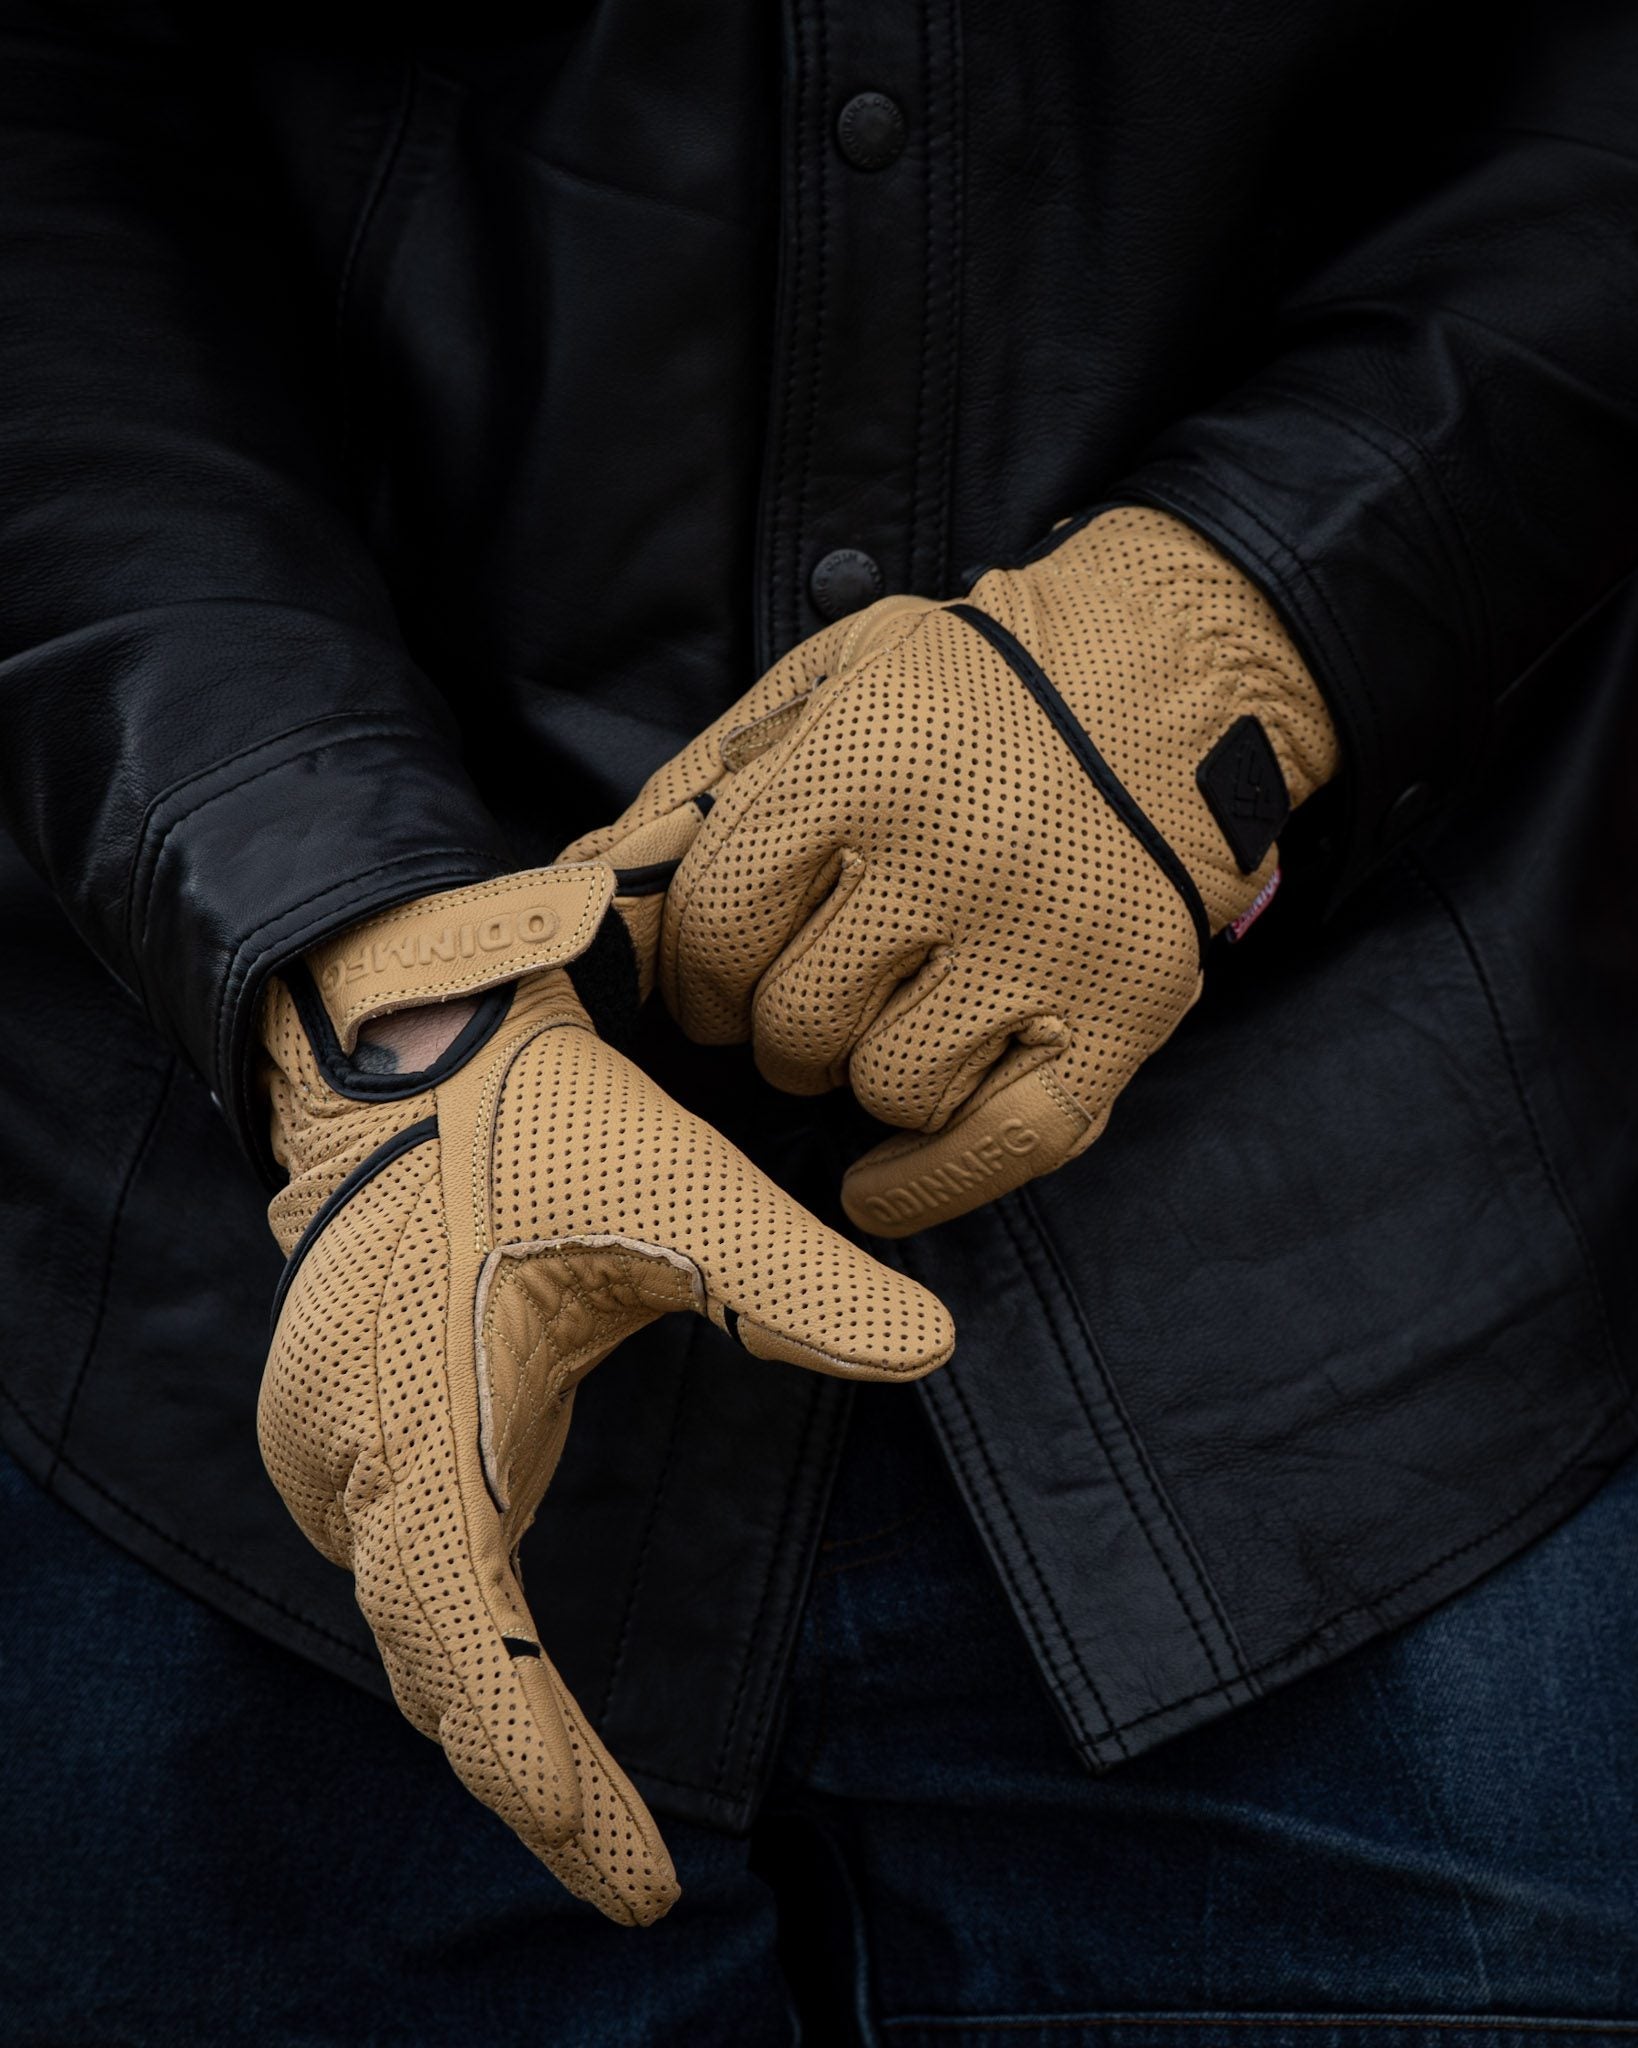 Heavy Hitters Motorcycle Gloves - Tan Smooth – Odin Mfg